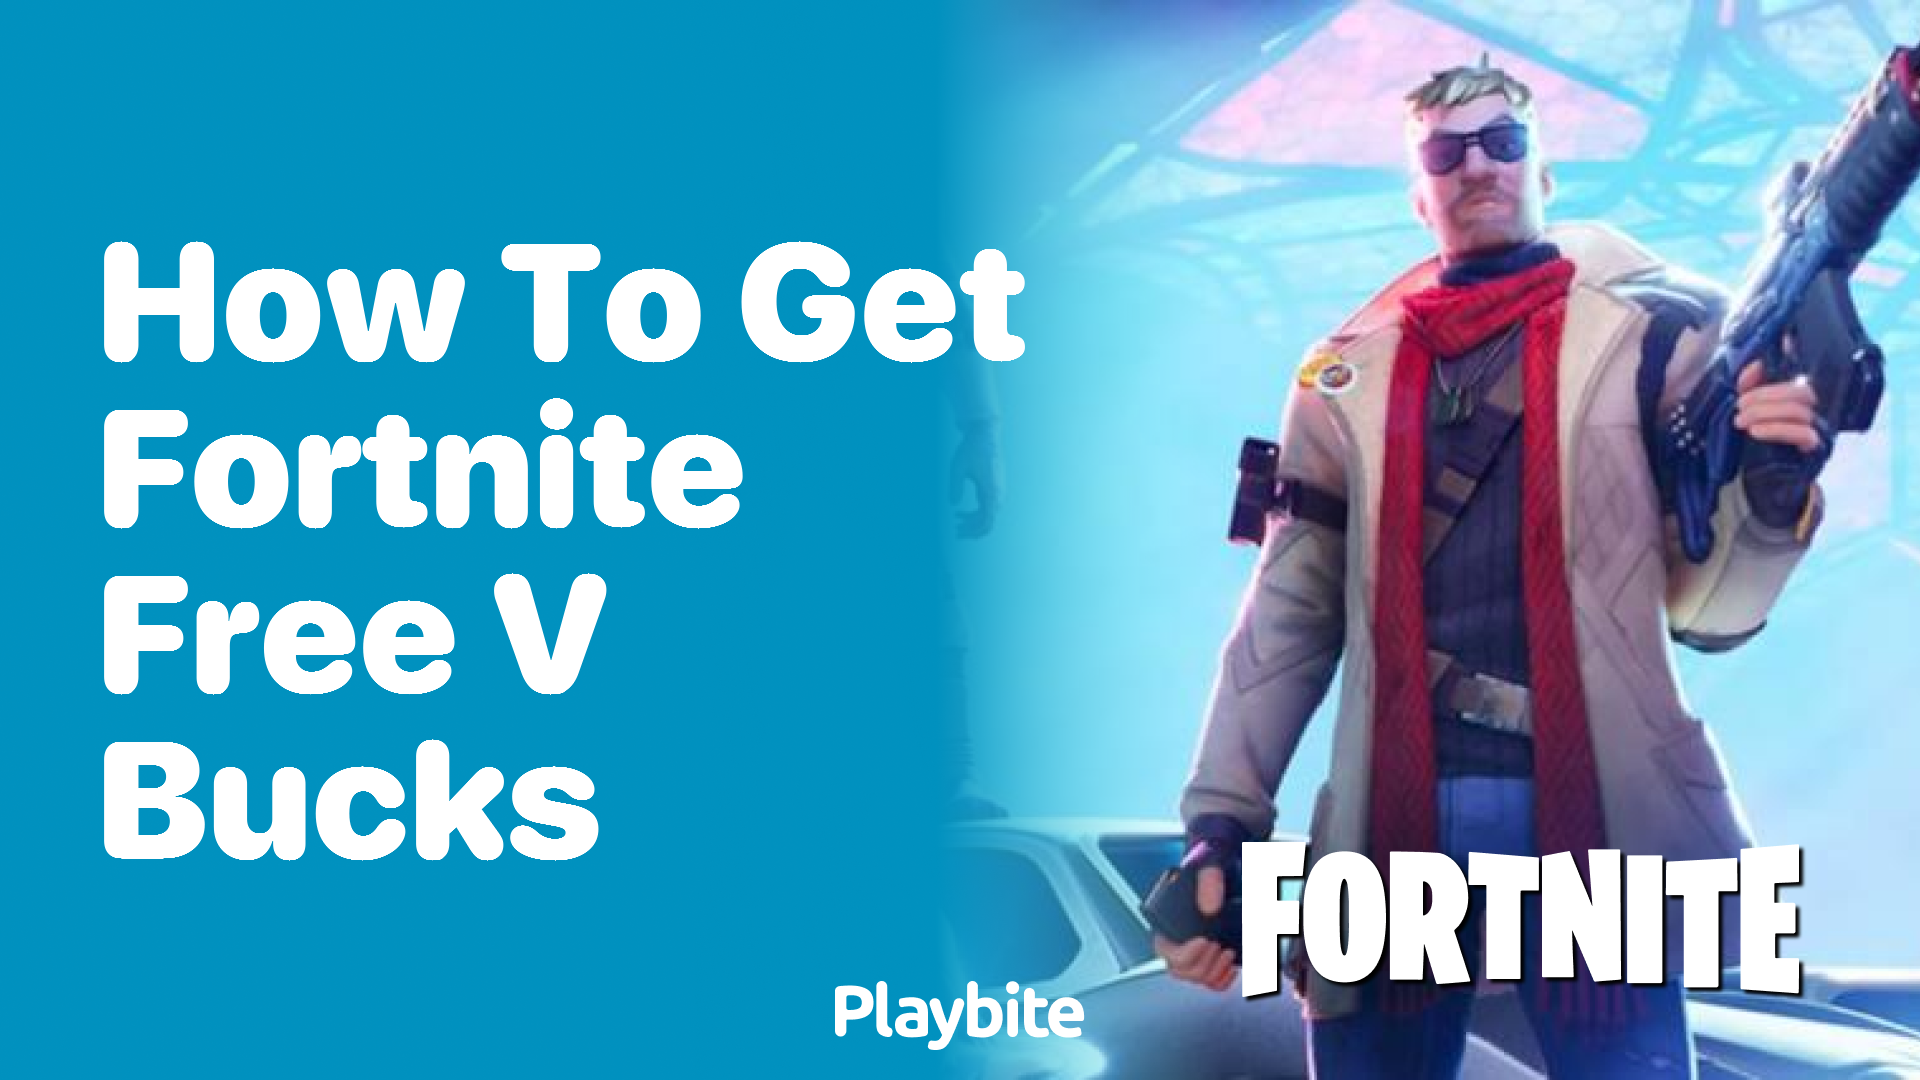 How to Get Fortnite Free V-Bucks: Your Ultimate Guide